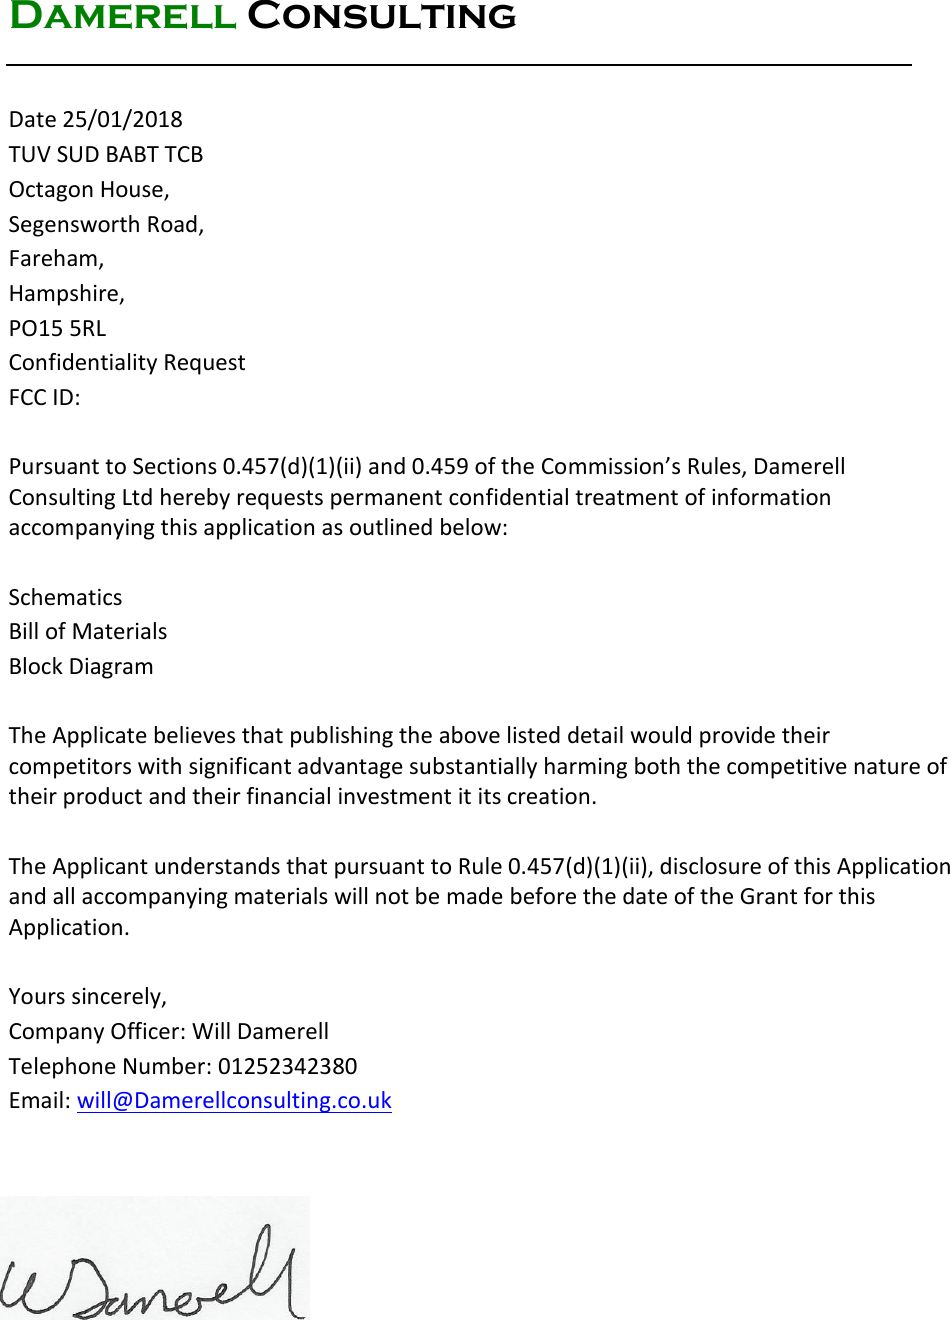 consulting cover letter bcg pdf